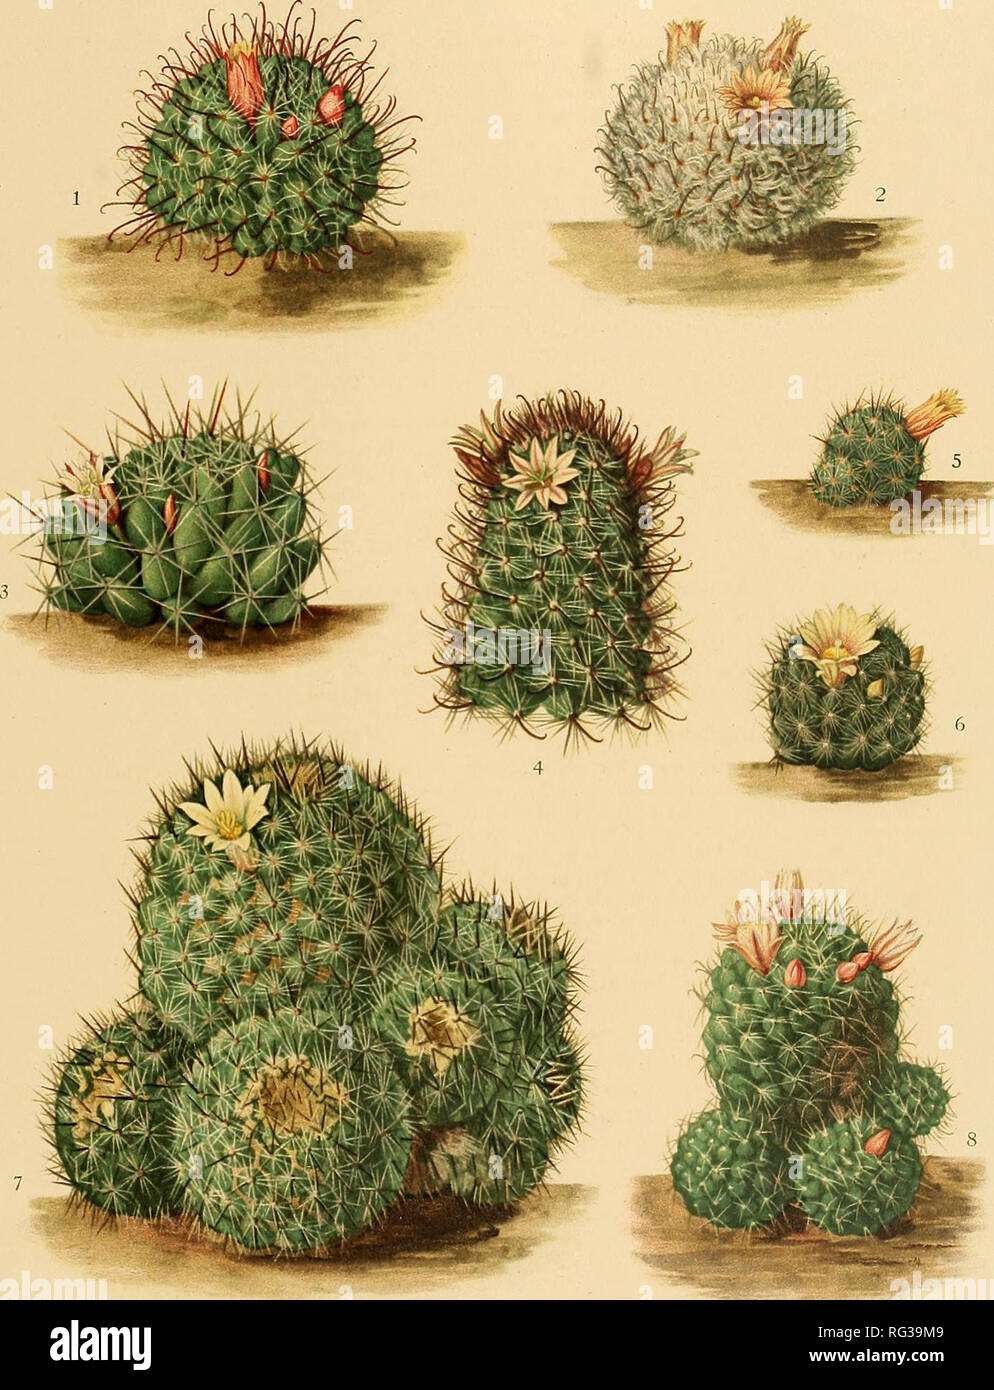 . The Cactaceae : descriptions and illustrations of plants of the cactus family. BRITTON AND ROSE, VOL. IV. E. Eaton del. 1. ^Xom&amp;ring x&gt;^a.ri oi Neomammillaria ktimeana. 5. 2. 'Flowering â plant oi JVeomam?ni//aria docasana. 6. 3. Flowering plant of Neomavimillaria decipiens. 7. 4. &quot;Xop o{^owexva.g'^l2intoi Neomammillaria armillaia. 8. Flowering plant of Neomammillaria multiceps. Flowering plant of Neomammillaria multiceps. Flowering plant of Neomammillaria palmeri. Flowering plant of Neotnamtnillaria wildii.. Please note that these images are extracted from scanned page images t Stock Photo